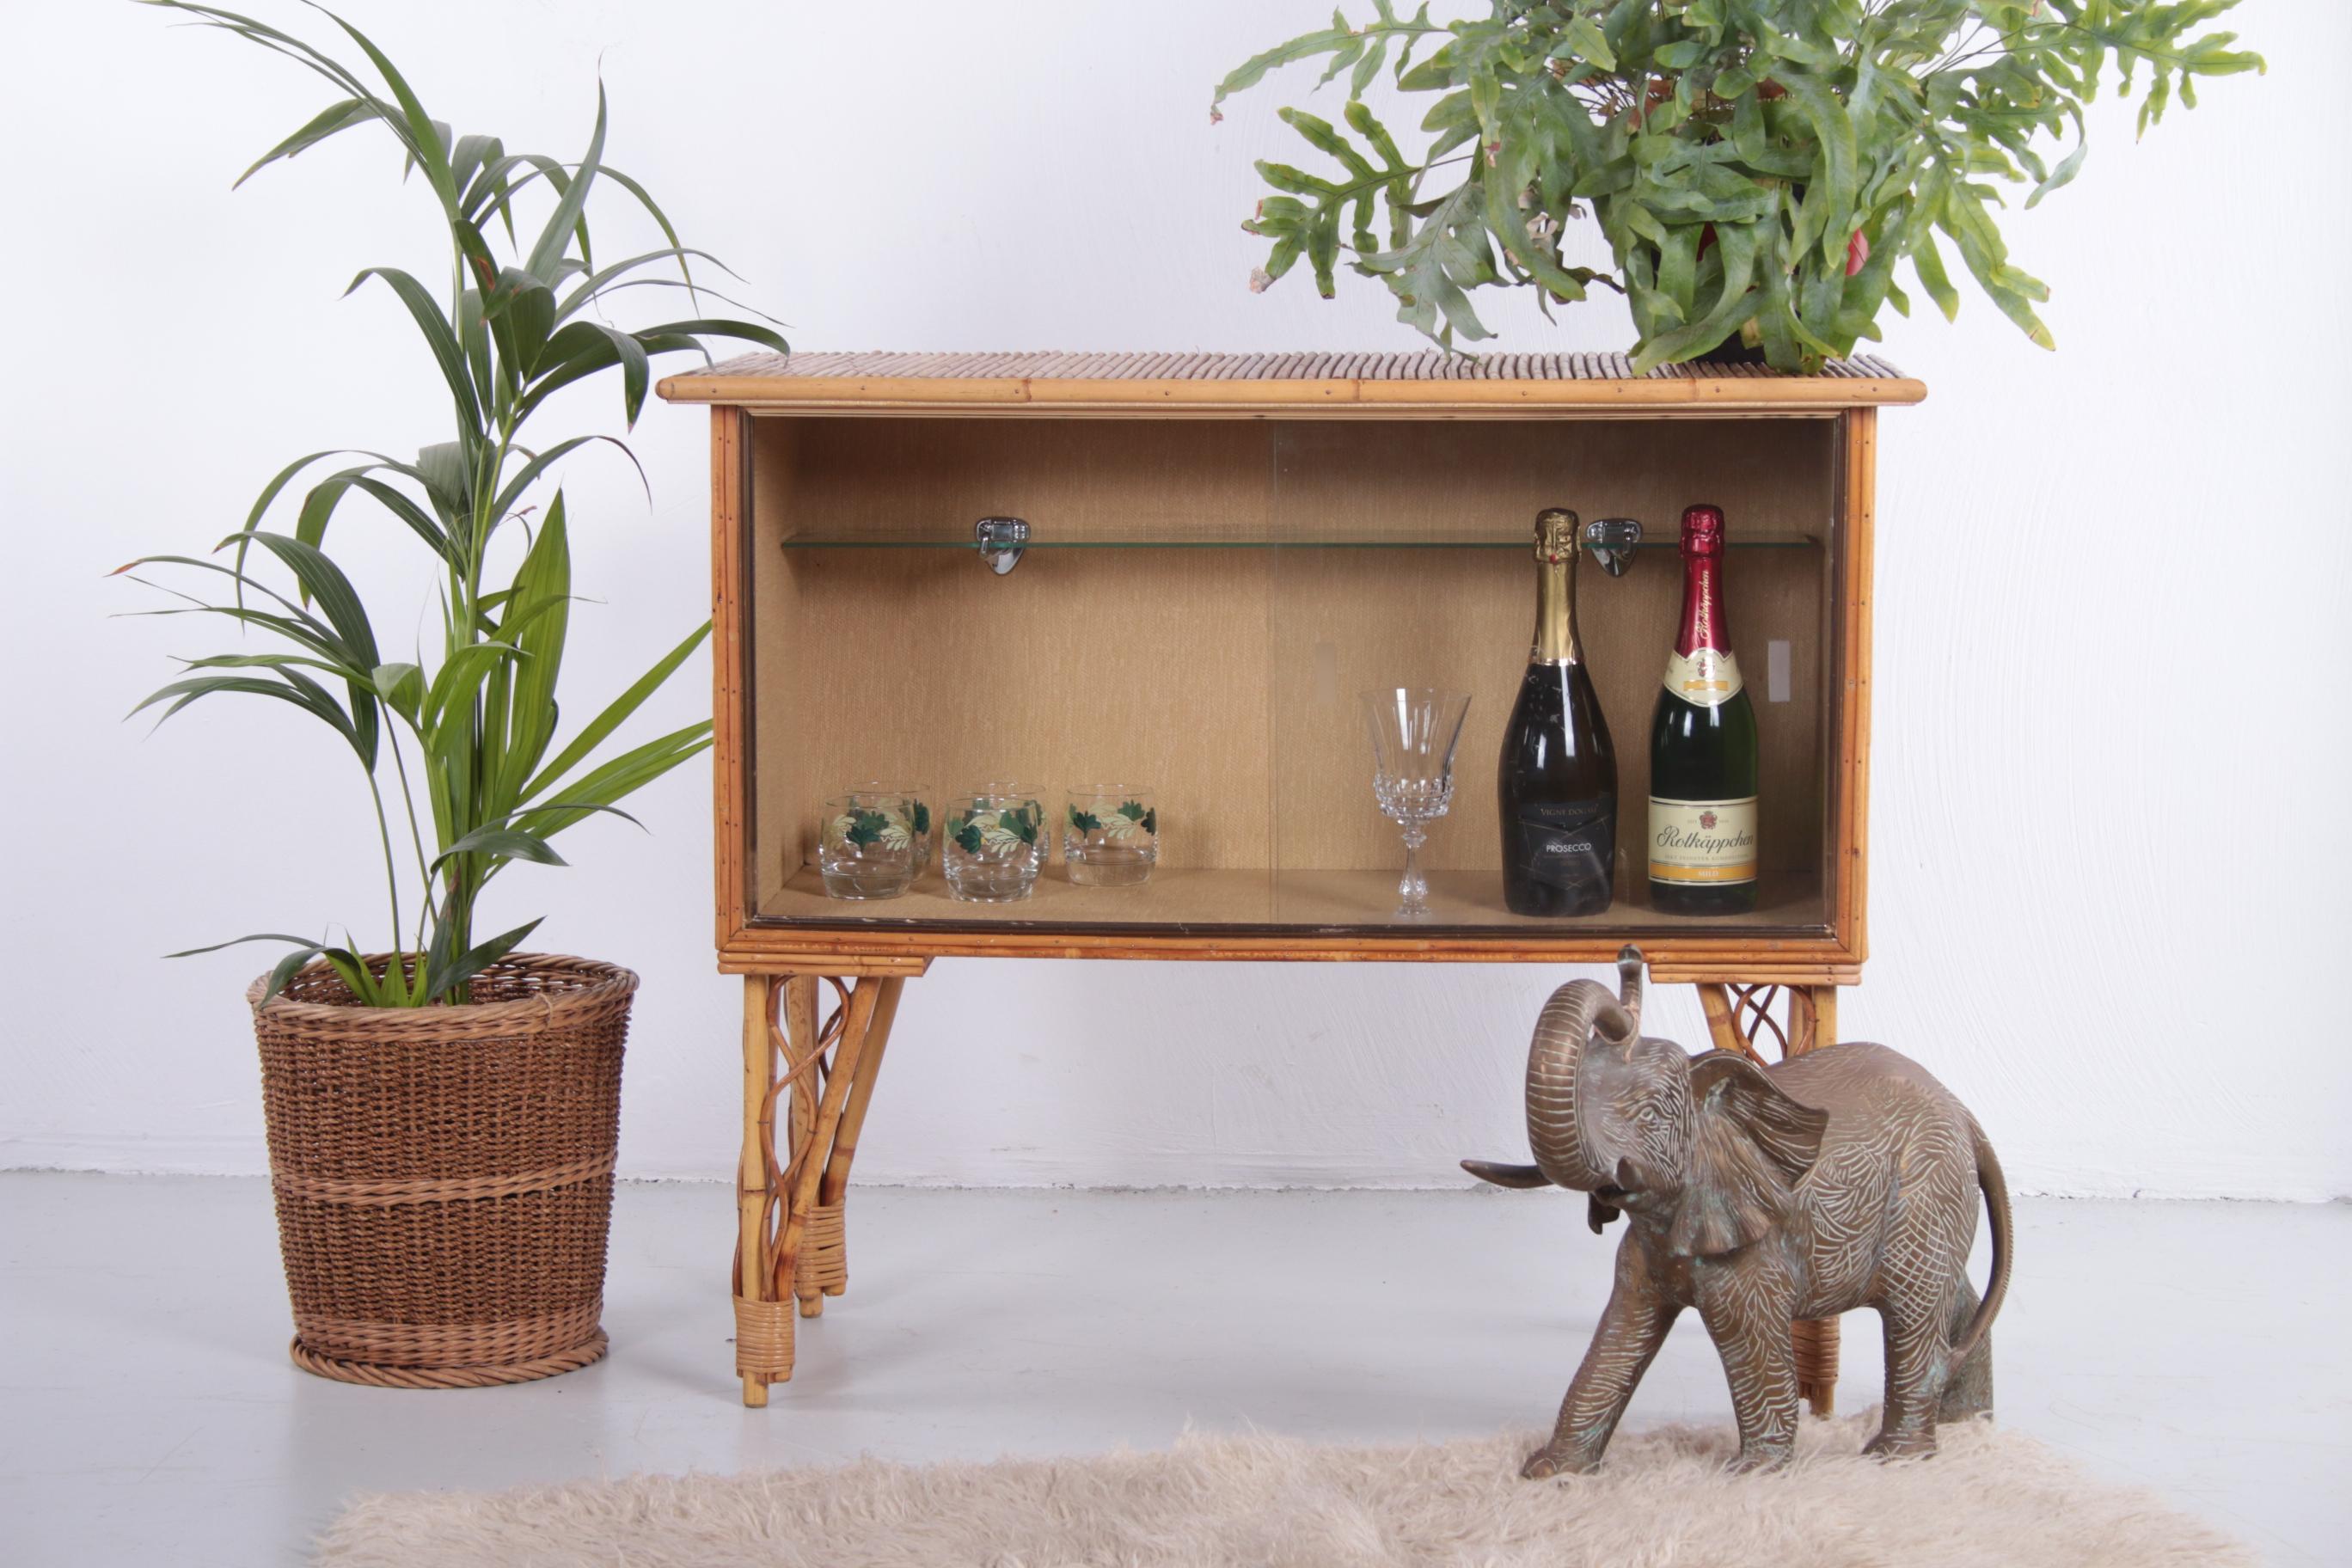 This is a stylish bamboo bar with glass sliding doors. The cabinet is from France and is made of beautiful thin bamboo. There is also an original glass shelf to place glasses on and the inside is lined with a light structure.

Do you want a summer